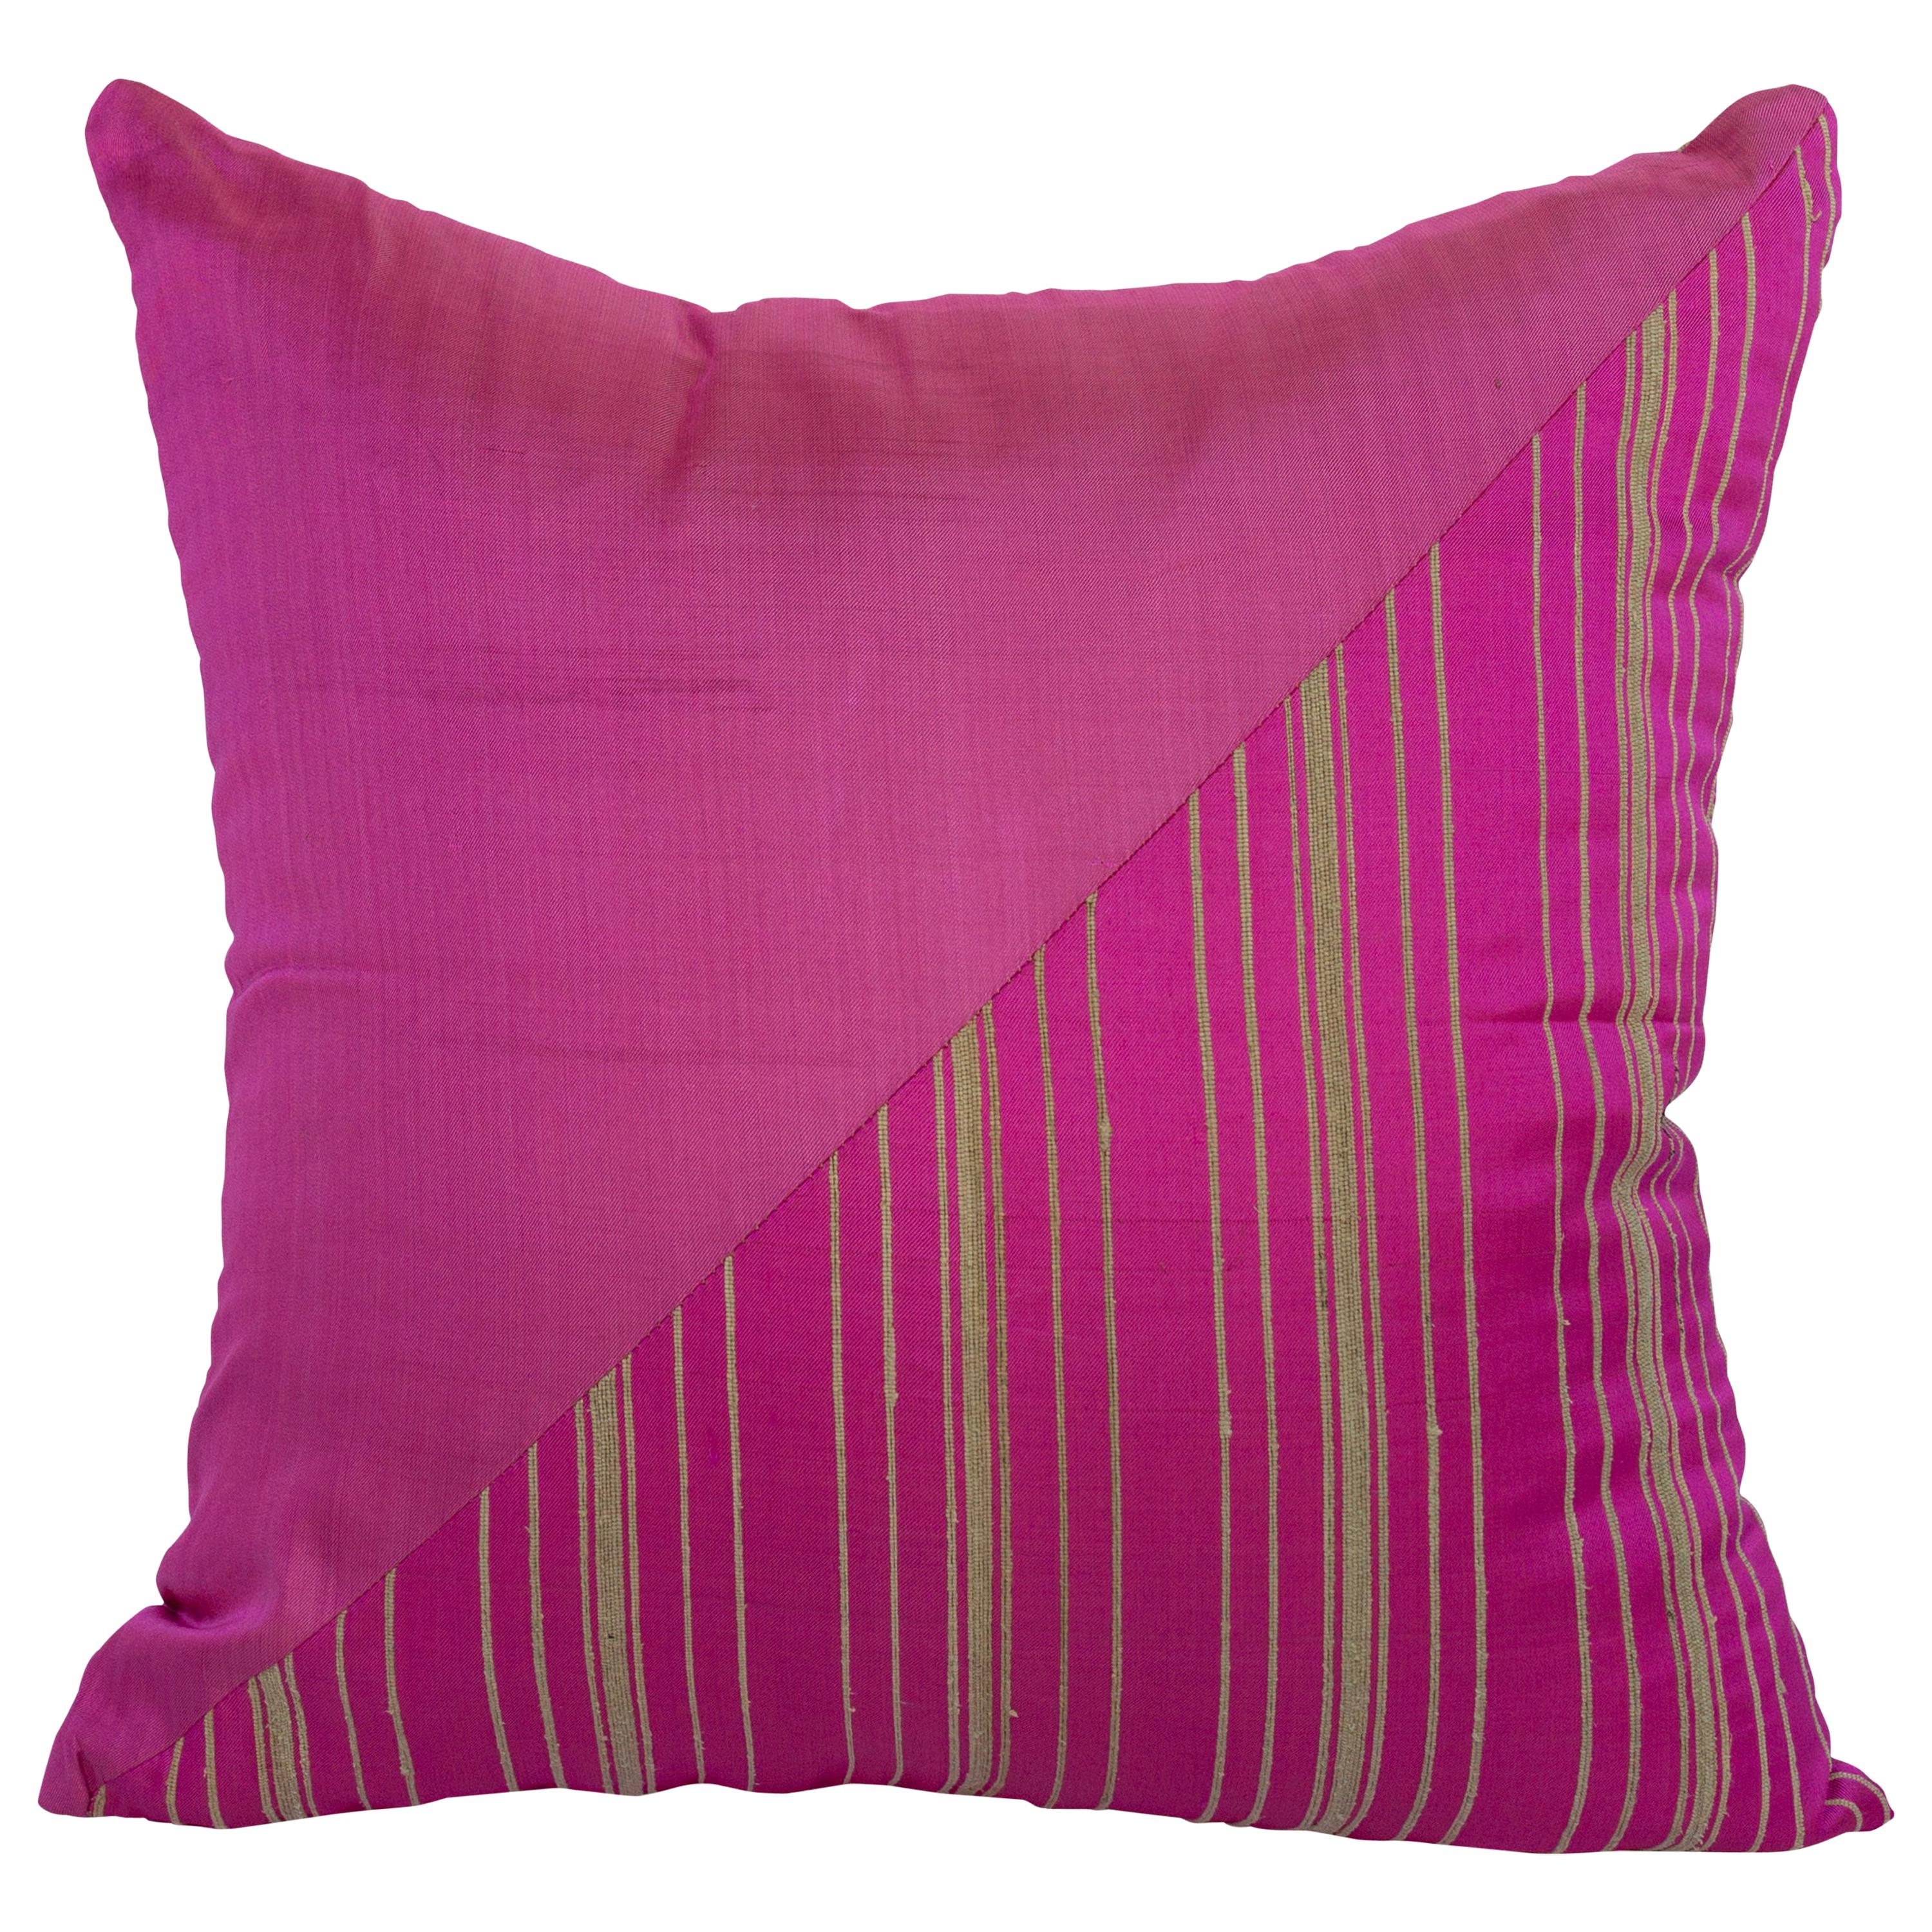 Lotus Flower and Silk Pillow from Myanmar, Hot Pink